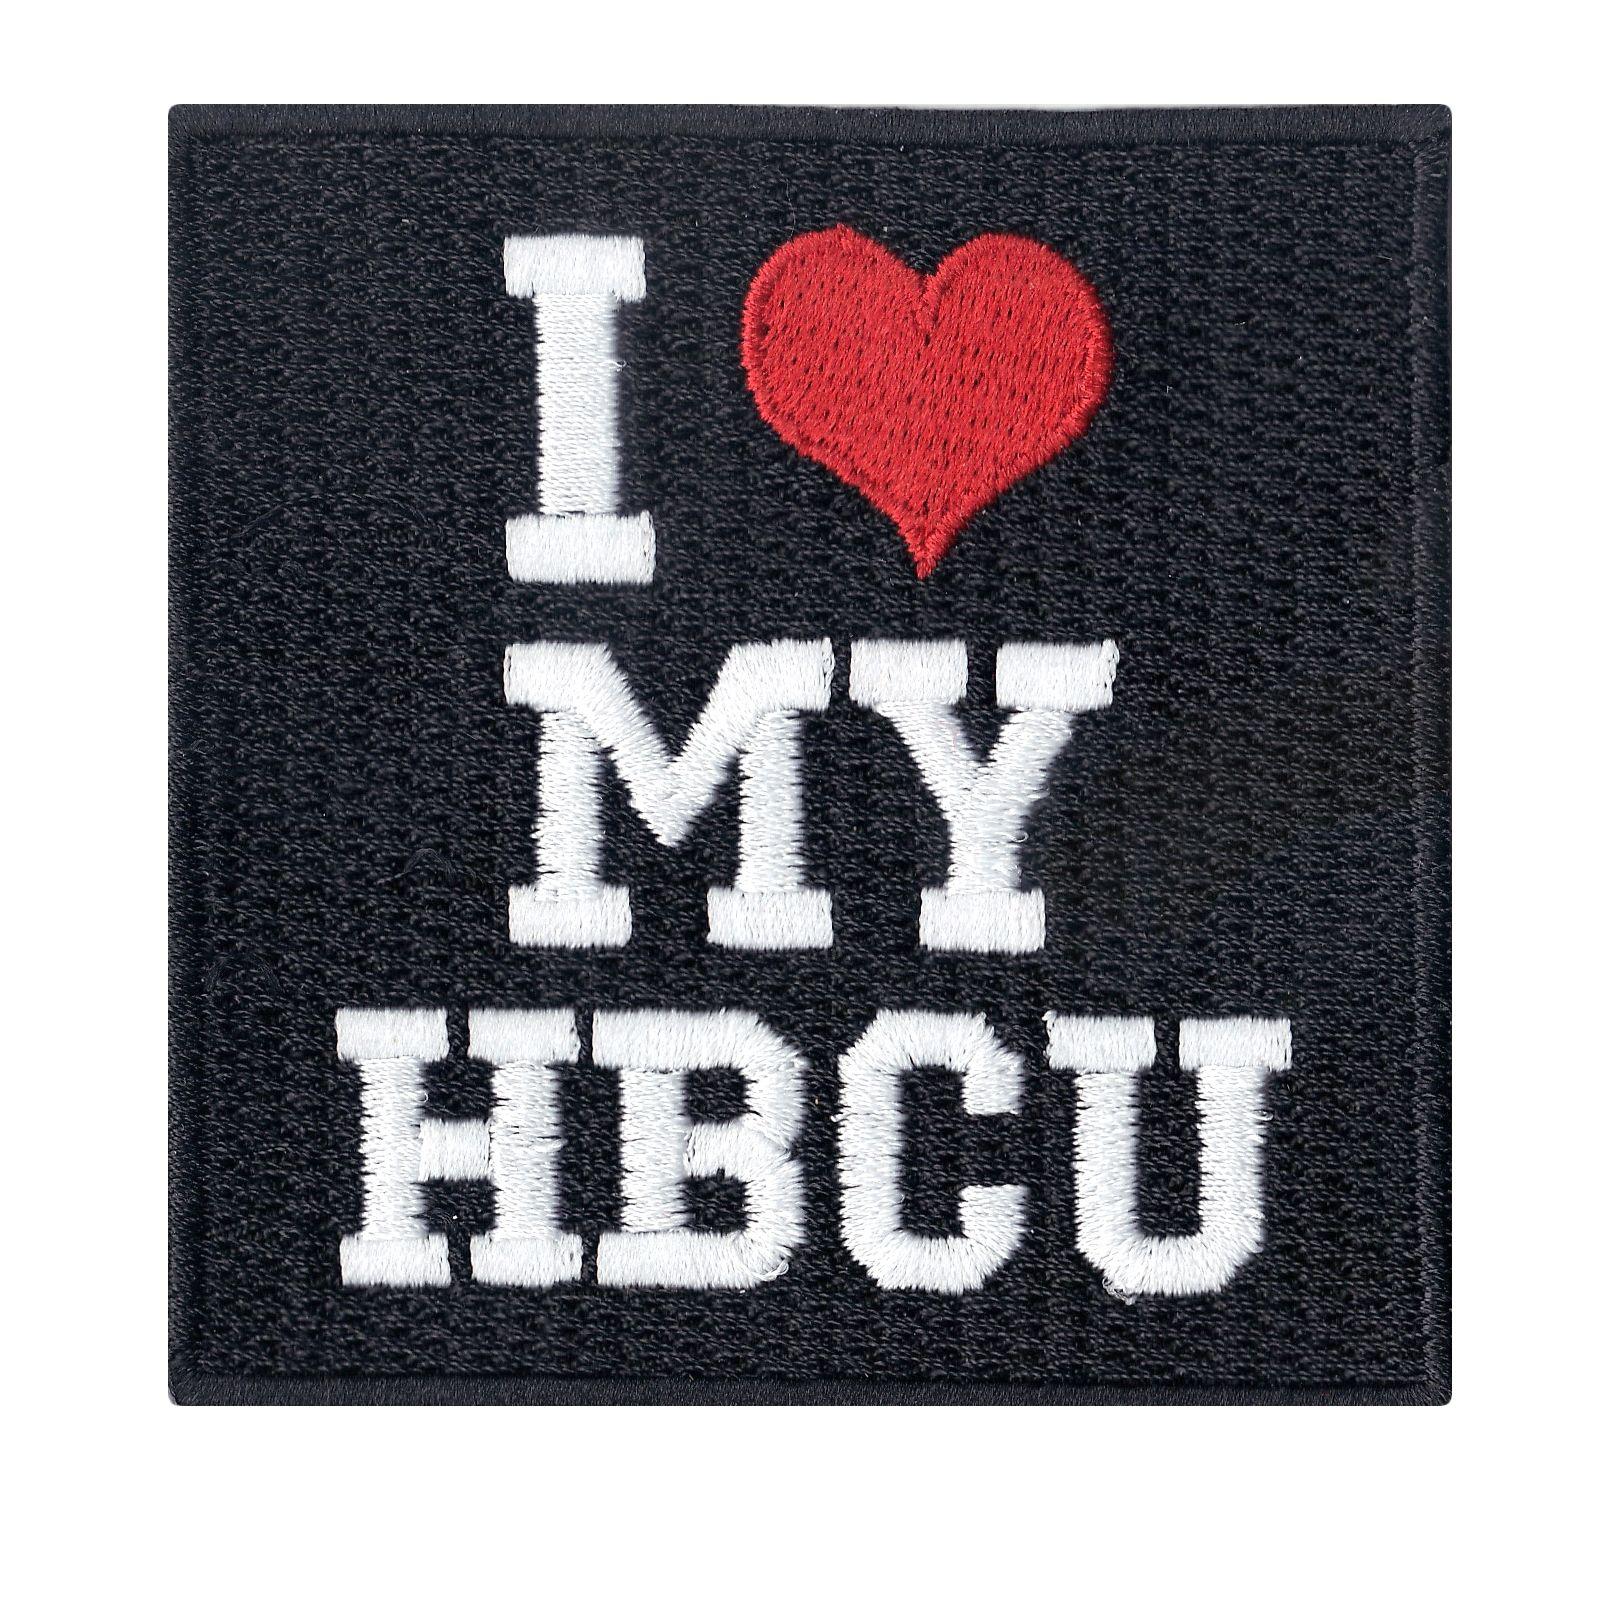 HBCU Logo - Details about I Love (Heart) My HBCU Box Logo Iron On Embroidered Black  Square Patch